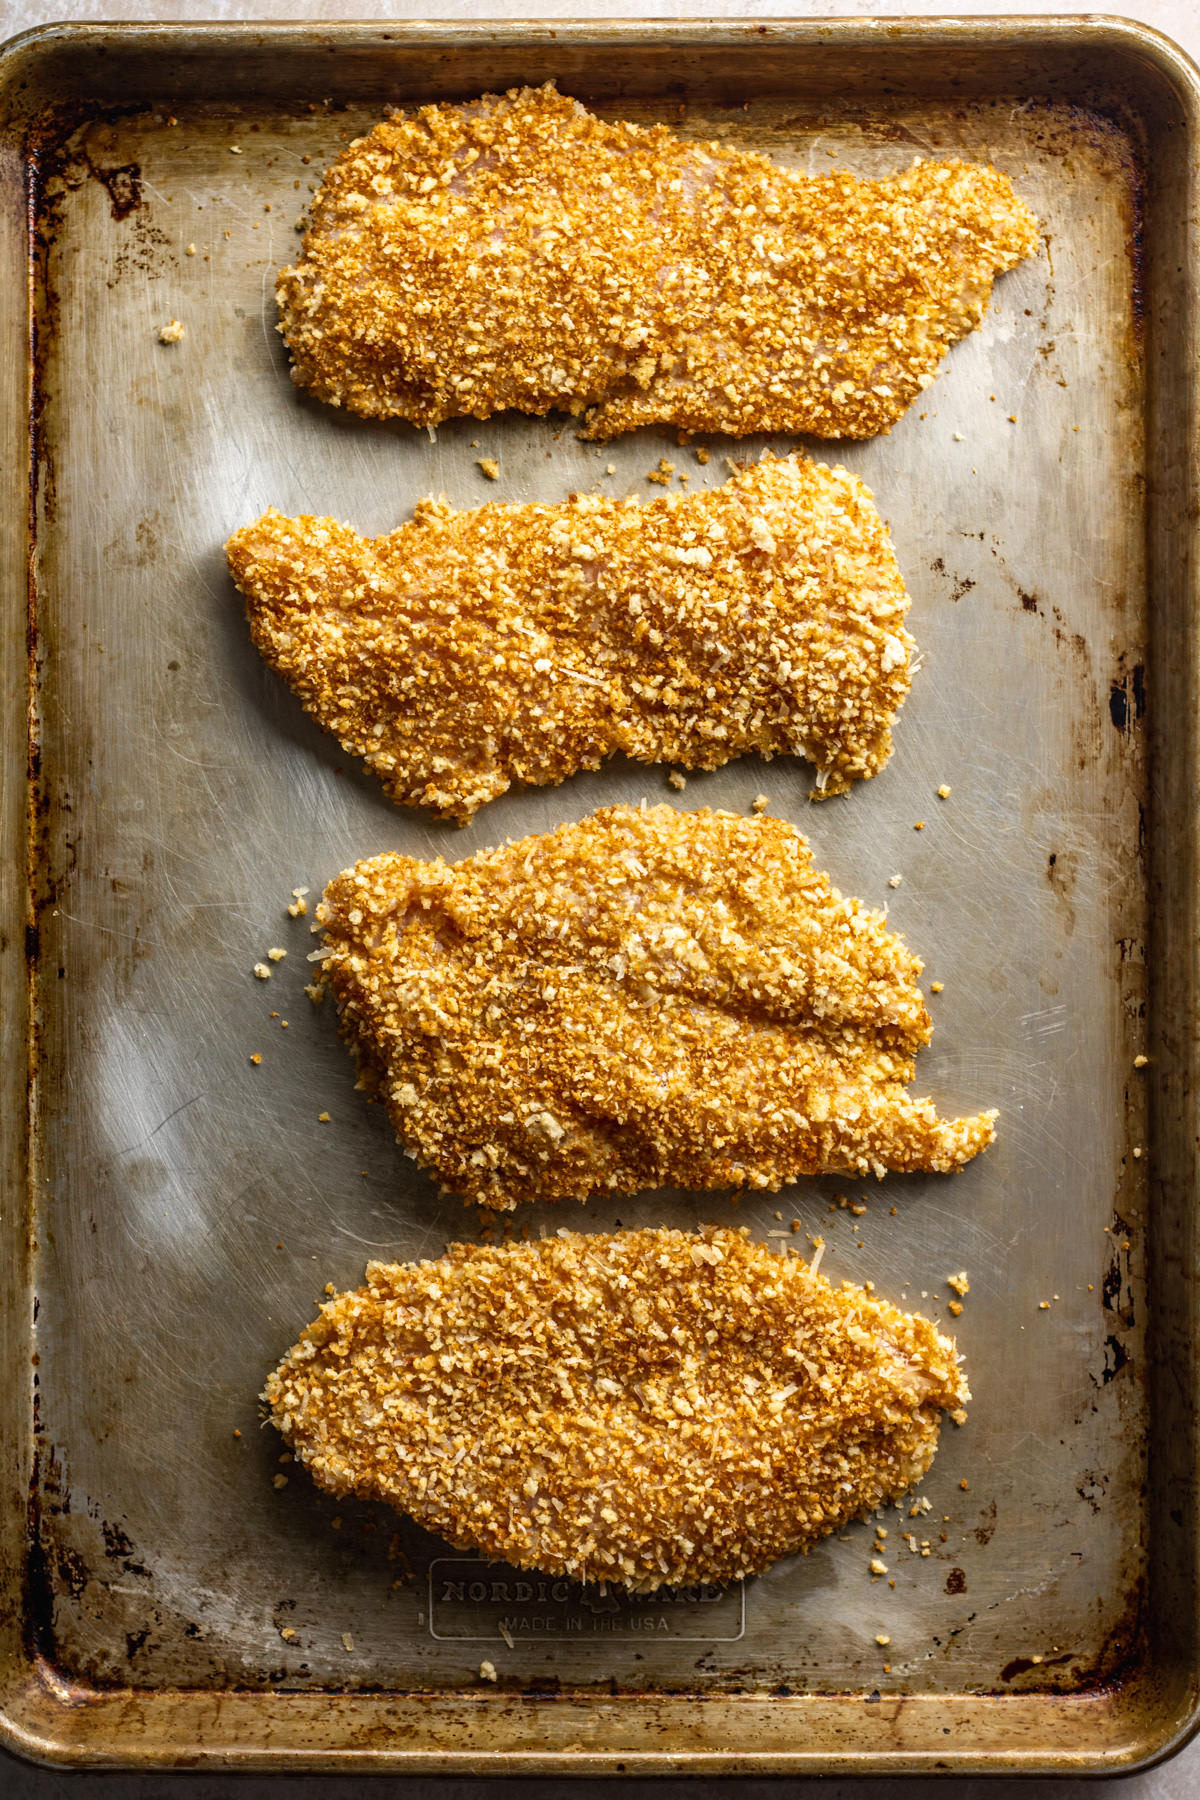 How Long To Bake Panko Chicken Breast?